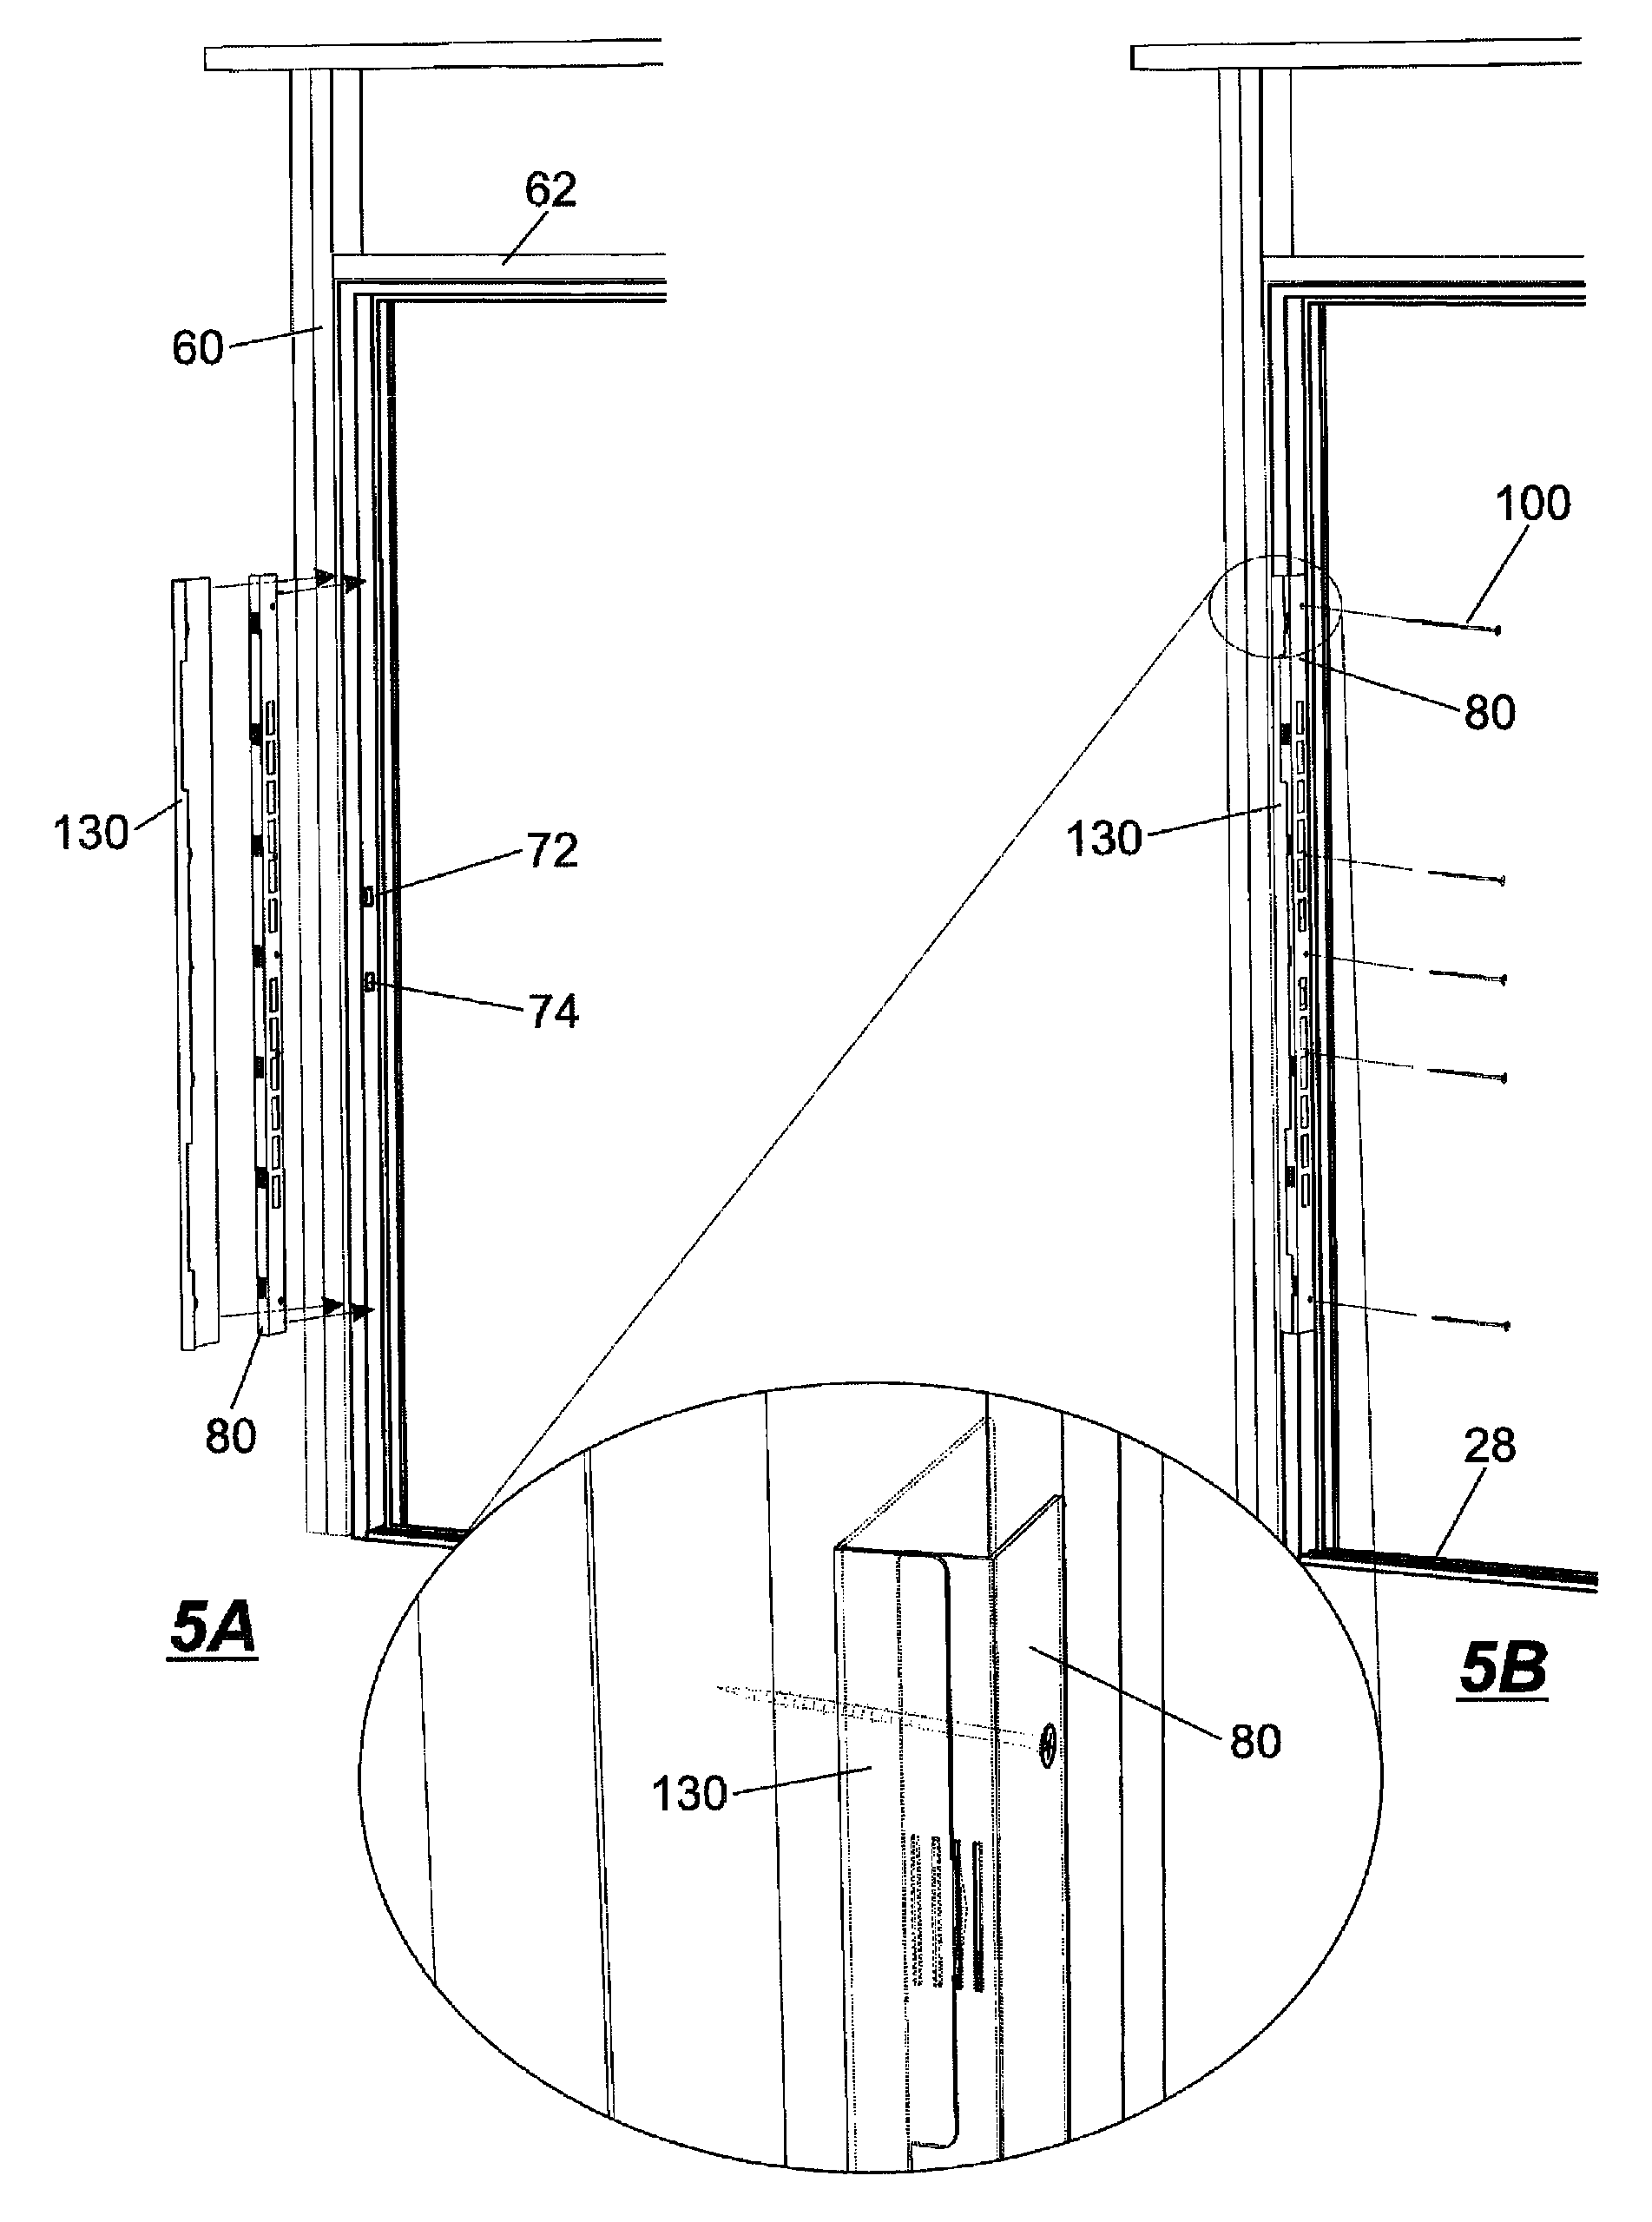 System and method for adjustable repair and reinforcement of non-standard doors and jambs